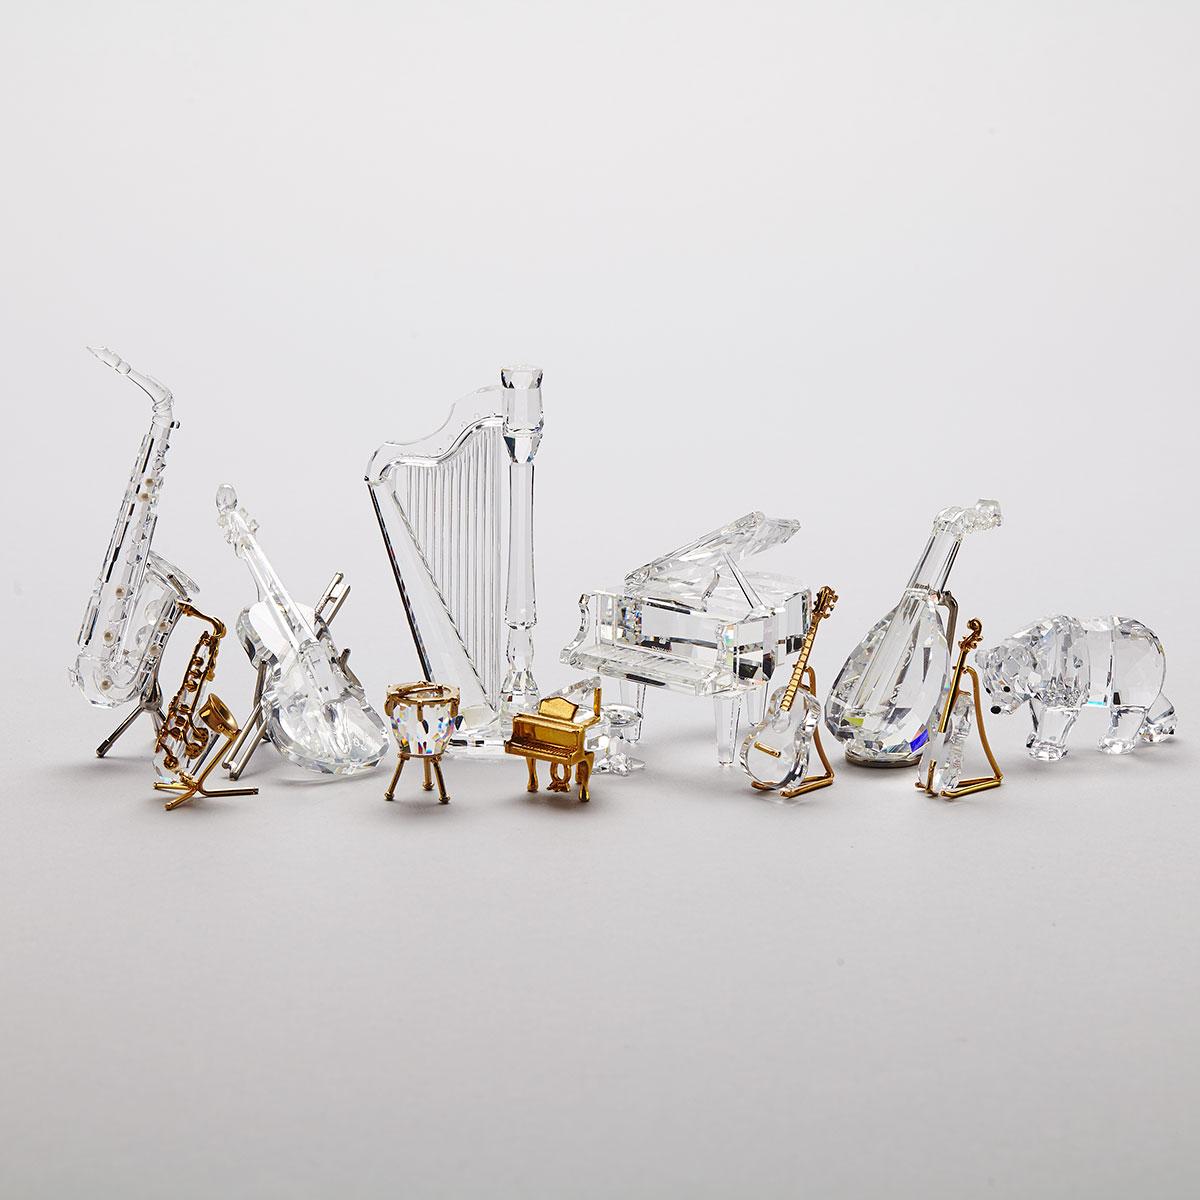 Ten Swarovski Crystal Musical Pieces and One Bear, late 20th/early 21st century